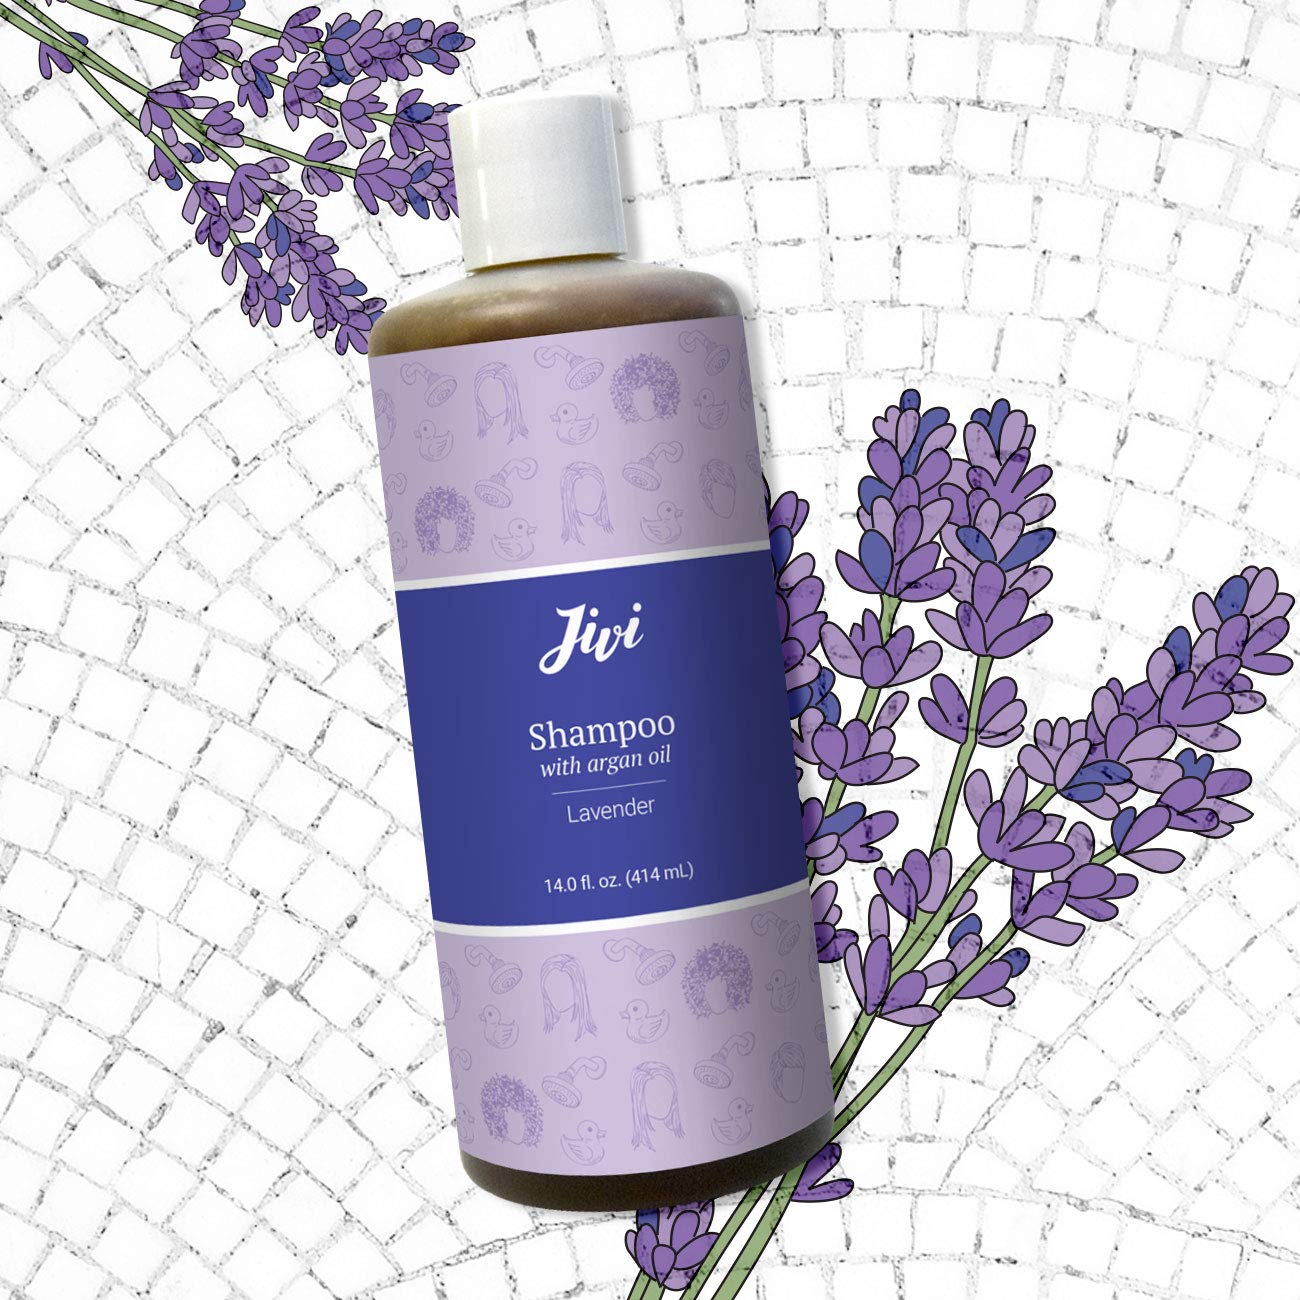 Jivi Shampoo With Argan Oil (Lavender) | Daily Use Shampoo for Healthier Hair | 100% Natural with Organic Ingredients | Made for All Hair Types, Color Safe | 14 fl. oz